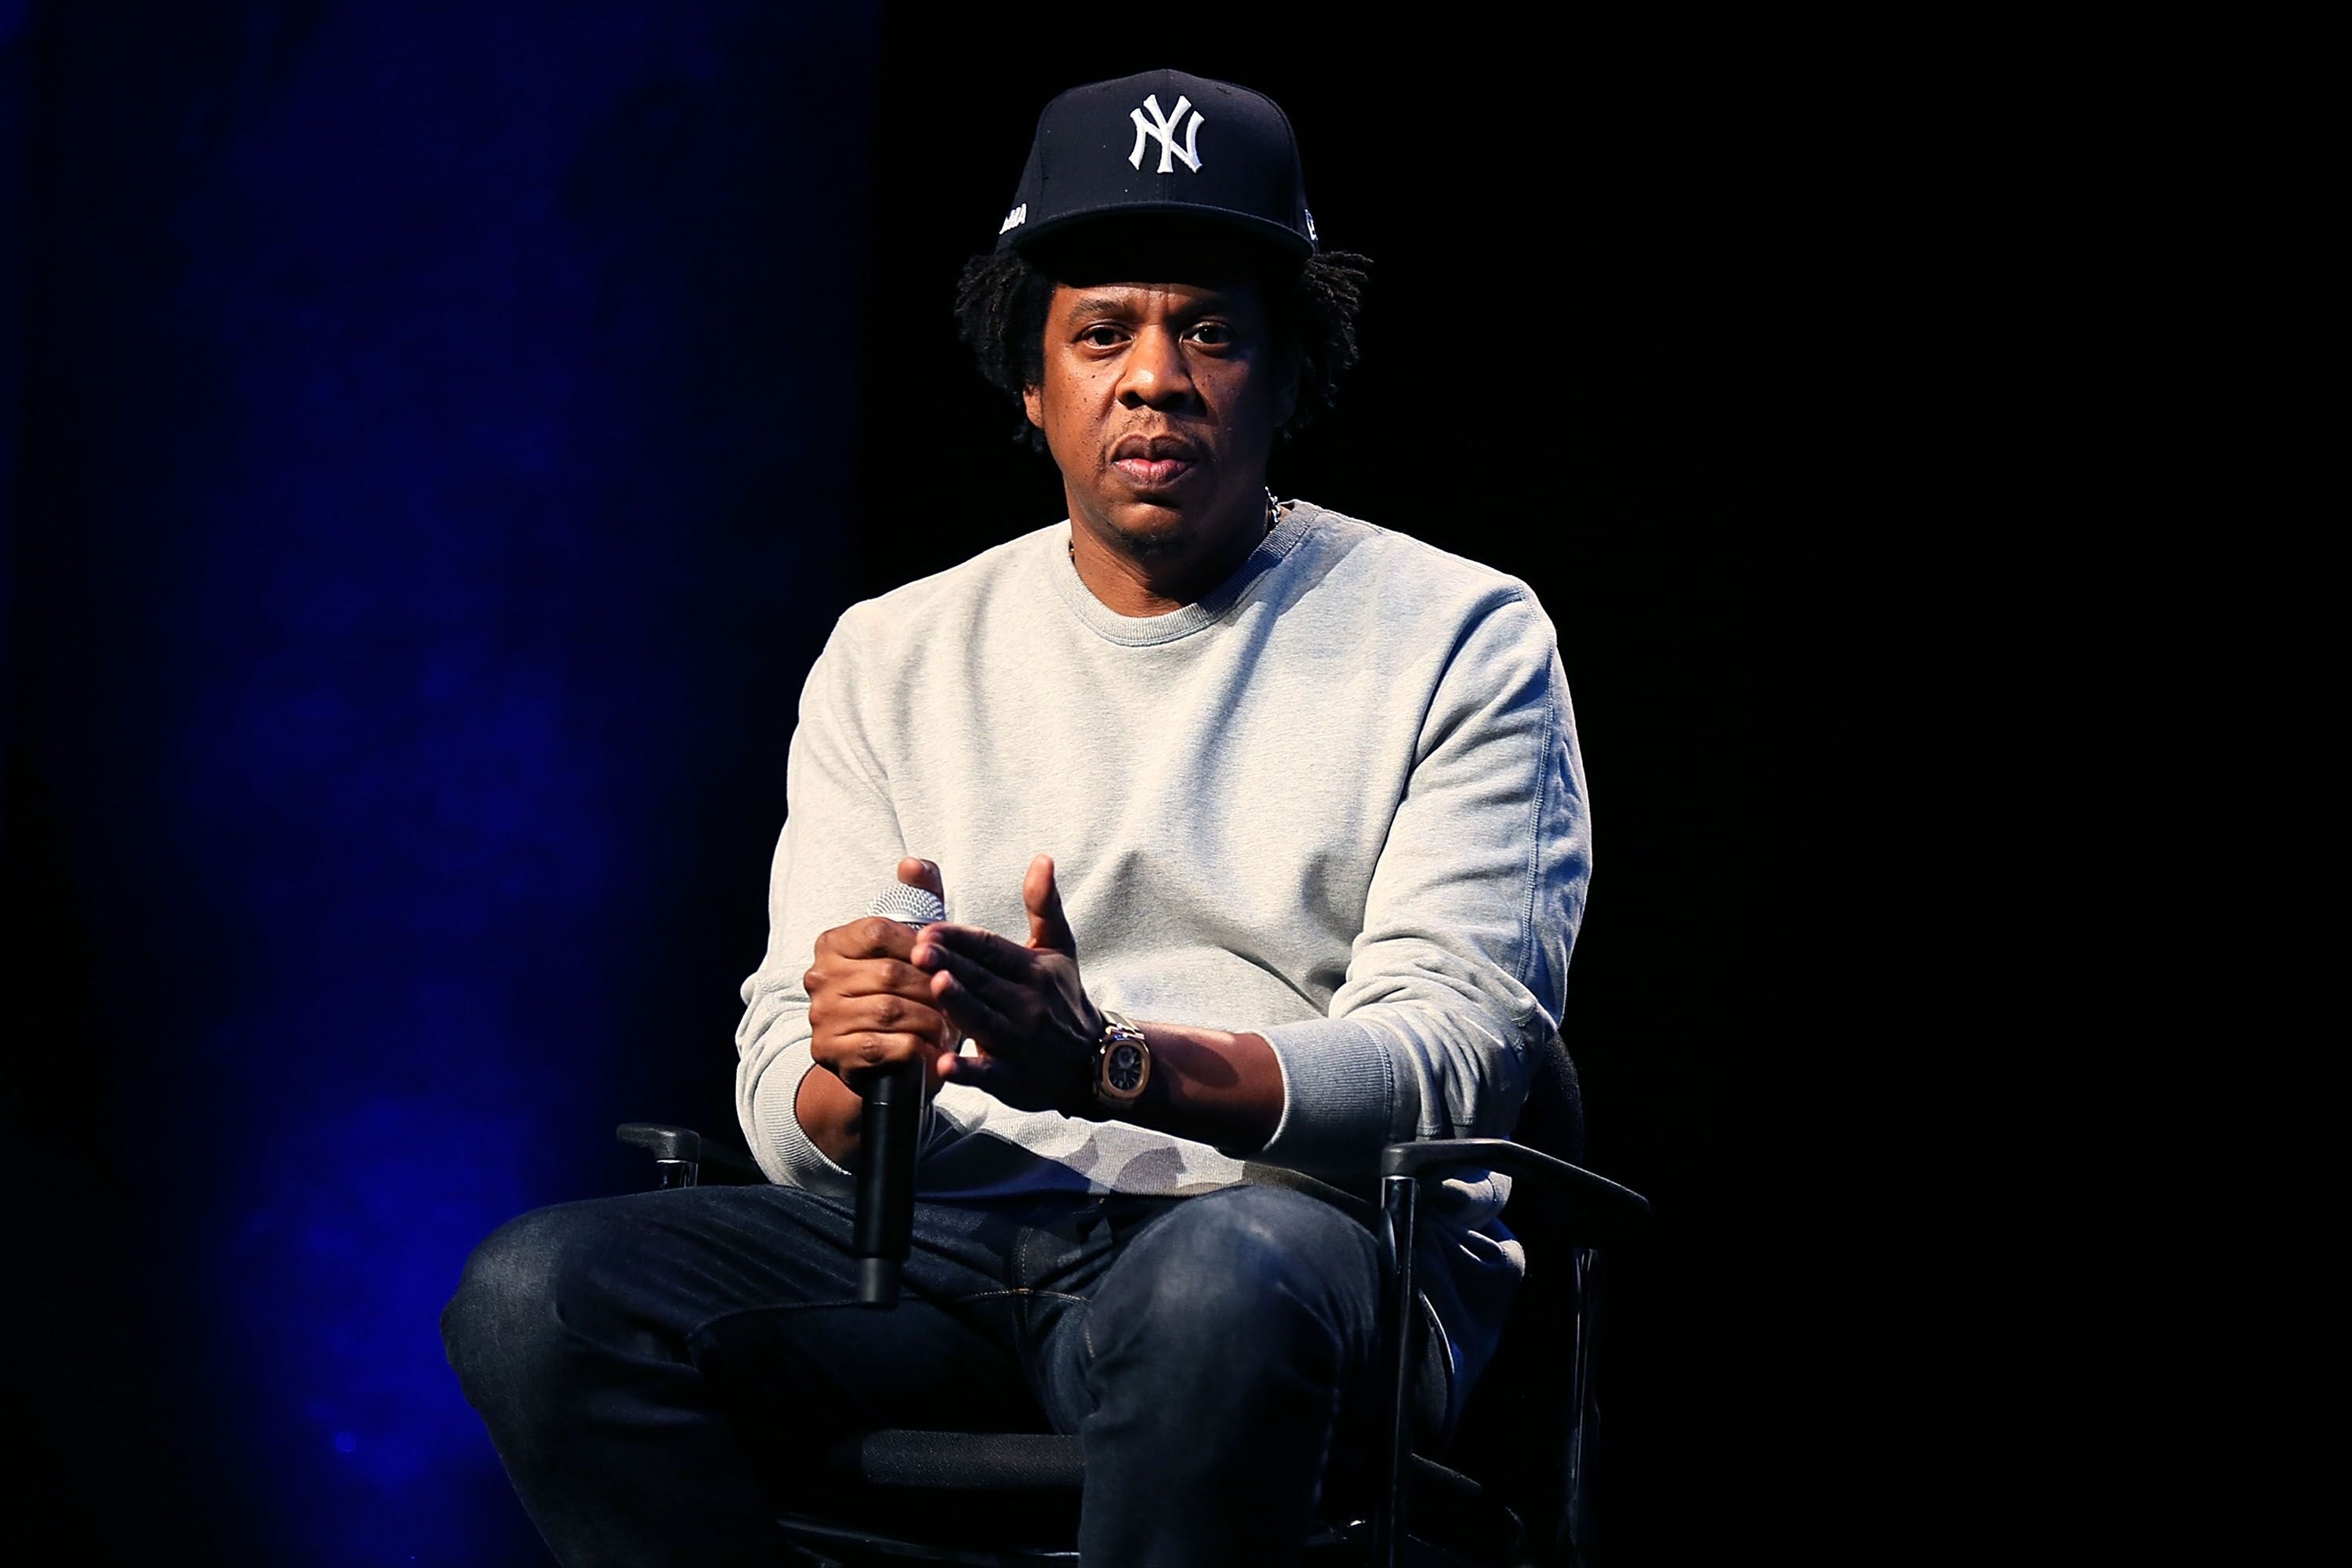 Jay-Z at the Criminal Justice Reform Organization Launch in 2019 | Source: Getty Images